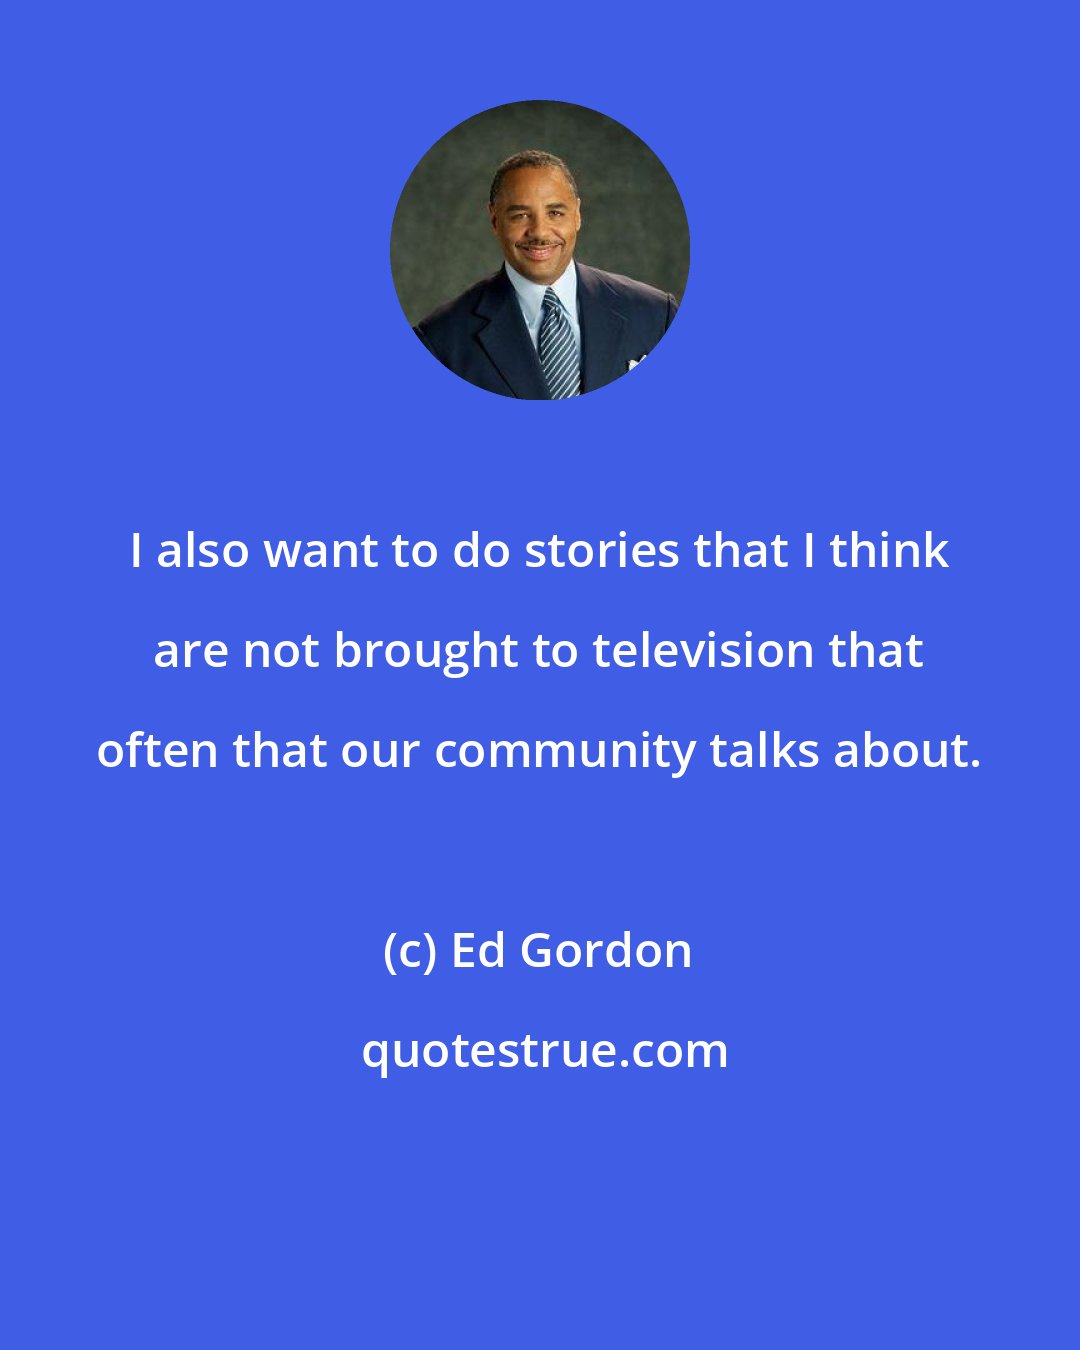 Ed Gordon: I also want to do stories that I think are not brought to television that often that our community talks about.